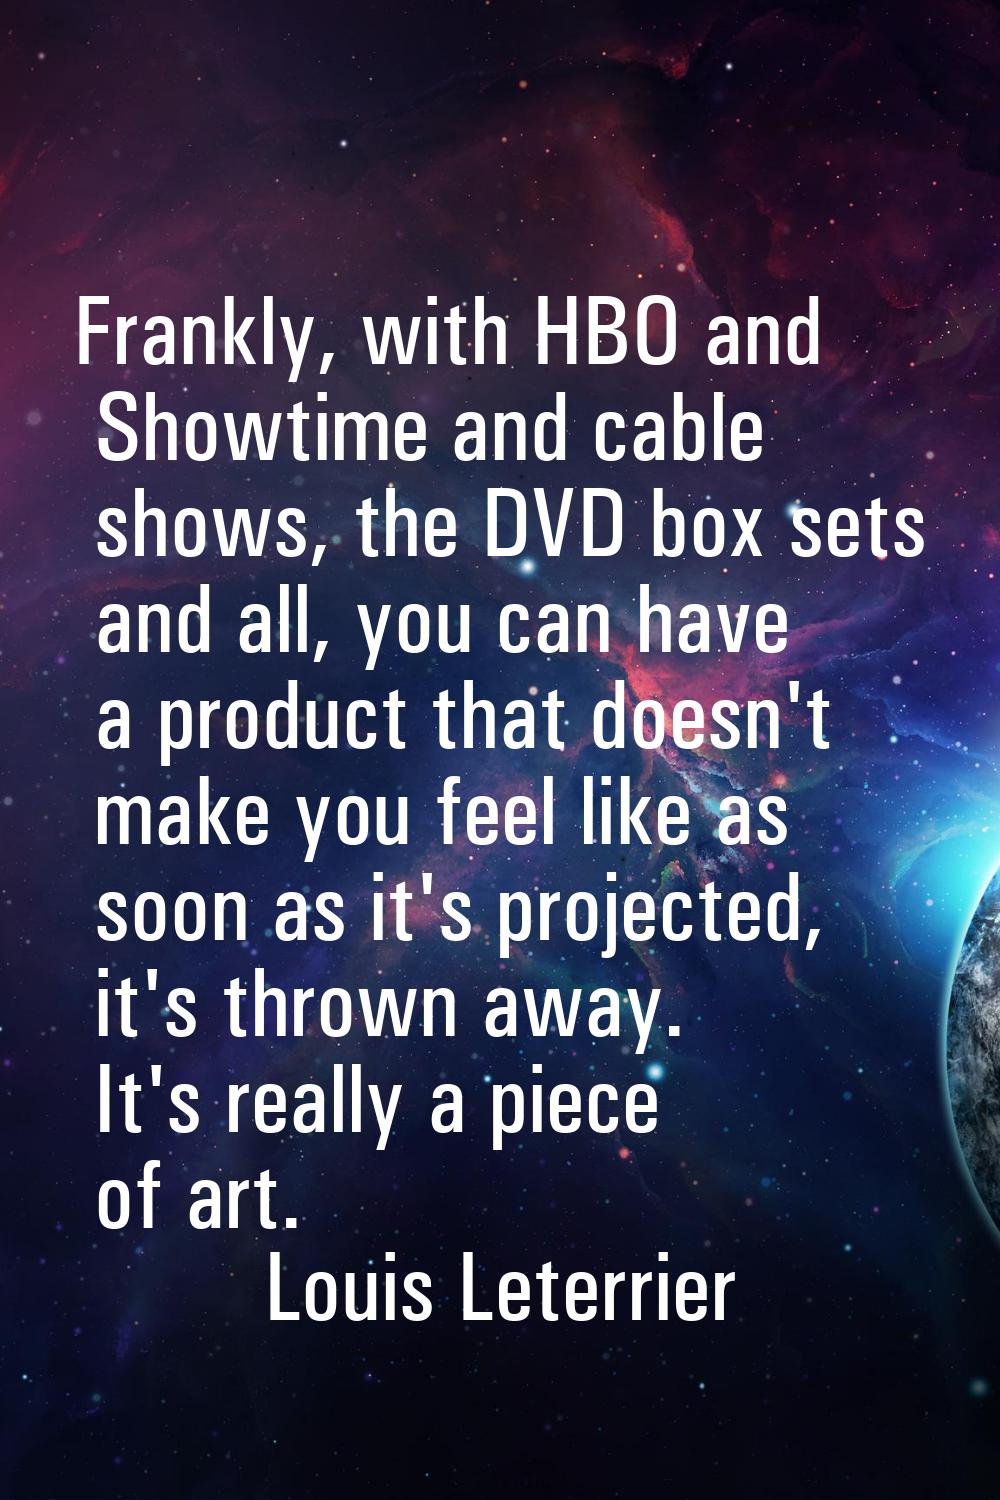 Frankly, with HBO and Showtime and cable shows, the DVD box sets and all, you can have a product th